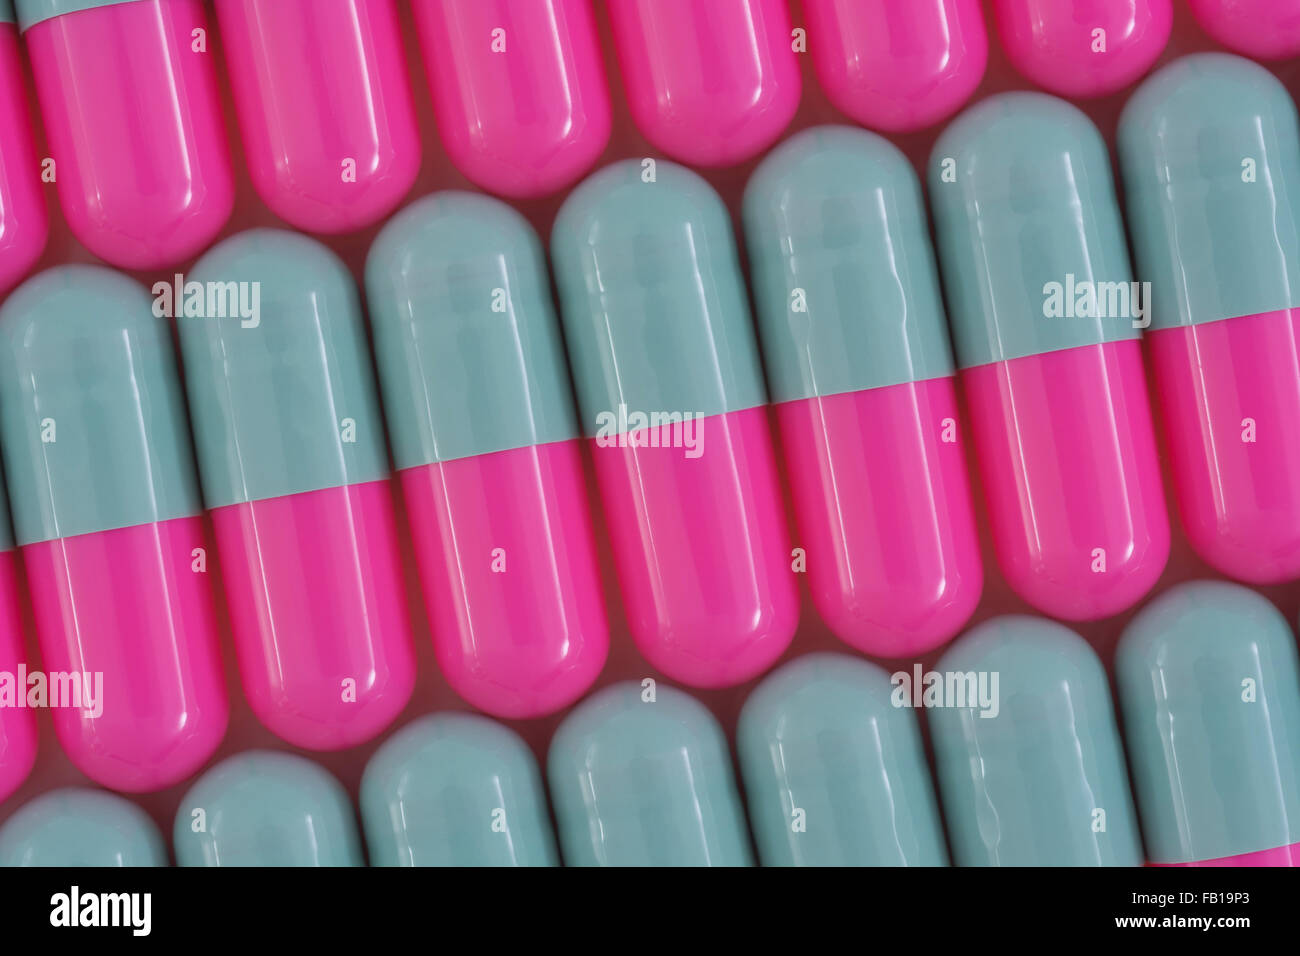 Close-up of pills - capsule form made of gelatin. Pink / Grey pills. Metaphor taking on American drug companies over high drug prices, drug trials. Stock Photo